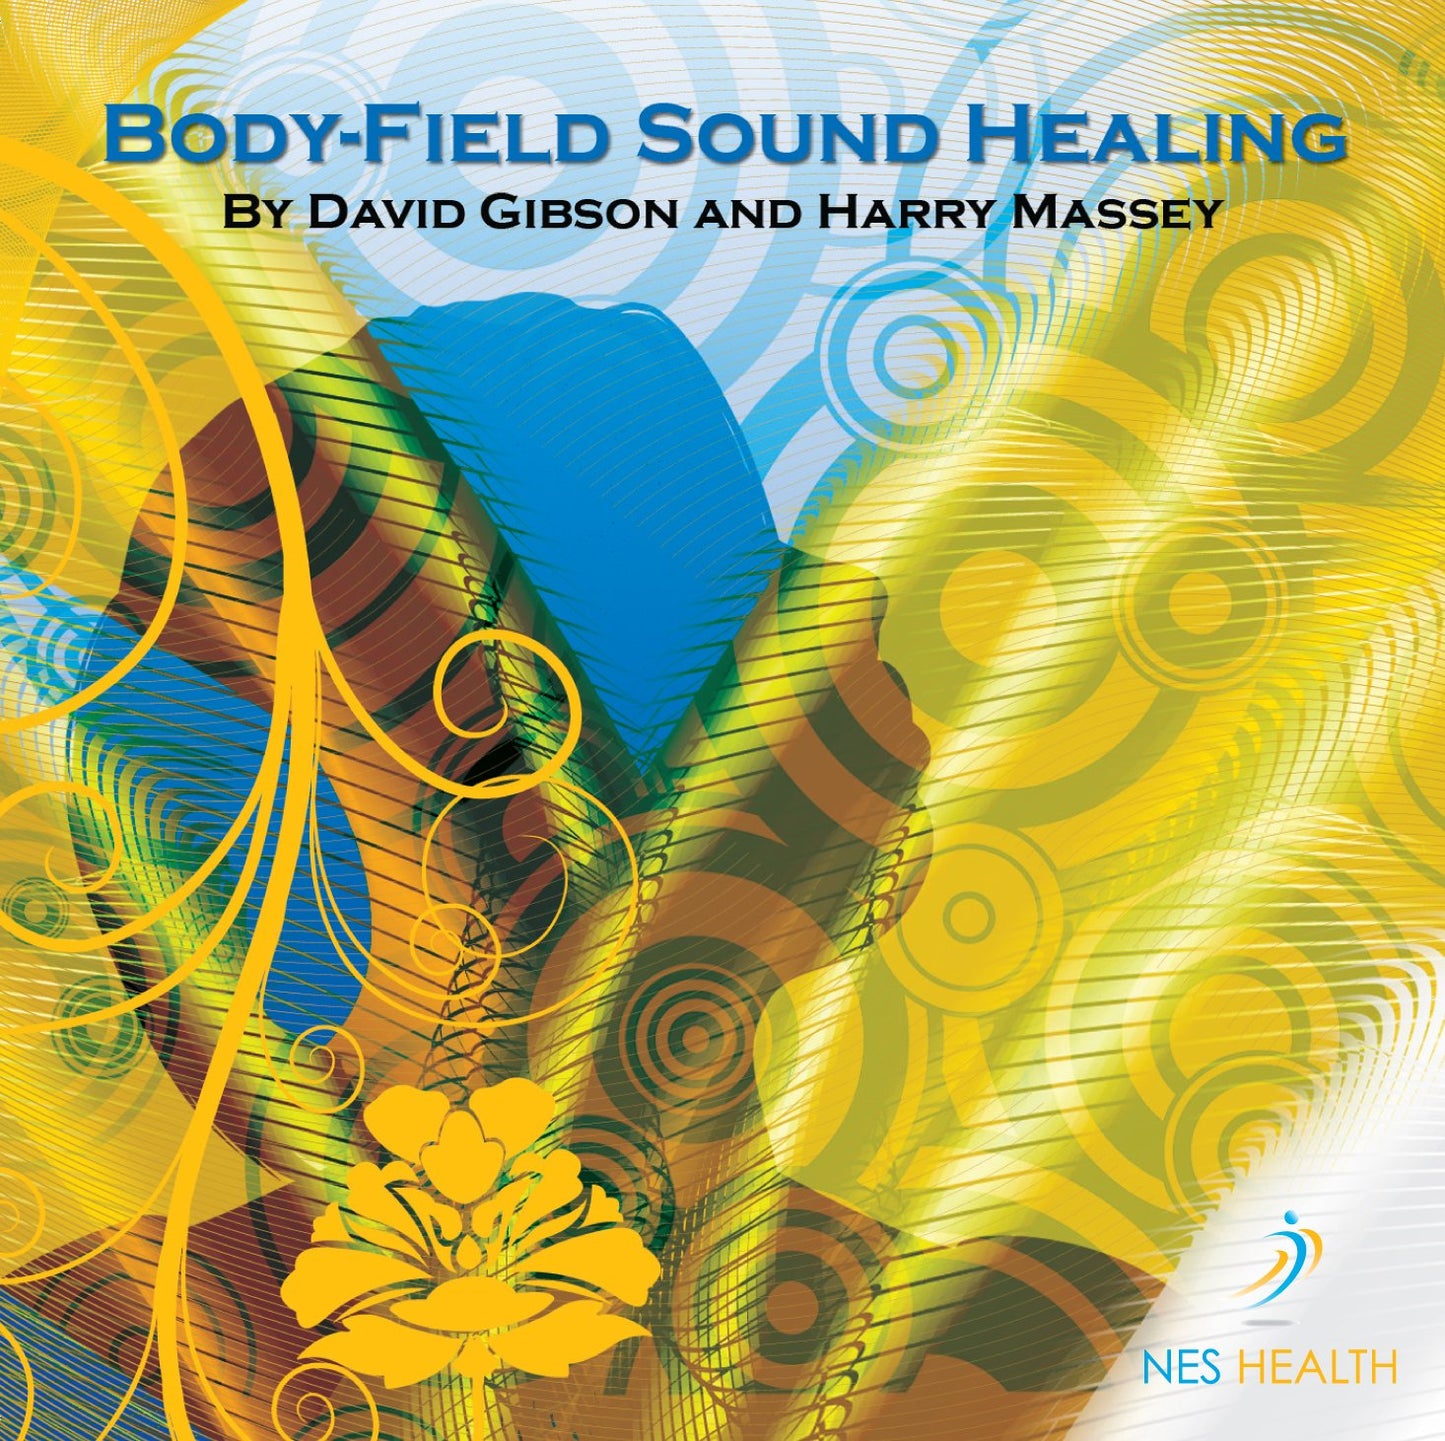 Body-Field Sound Healing CD by David Gibson and Harry Massey - SozoSoundz Tuning Forks